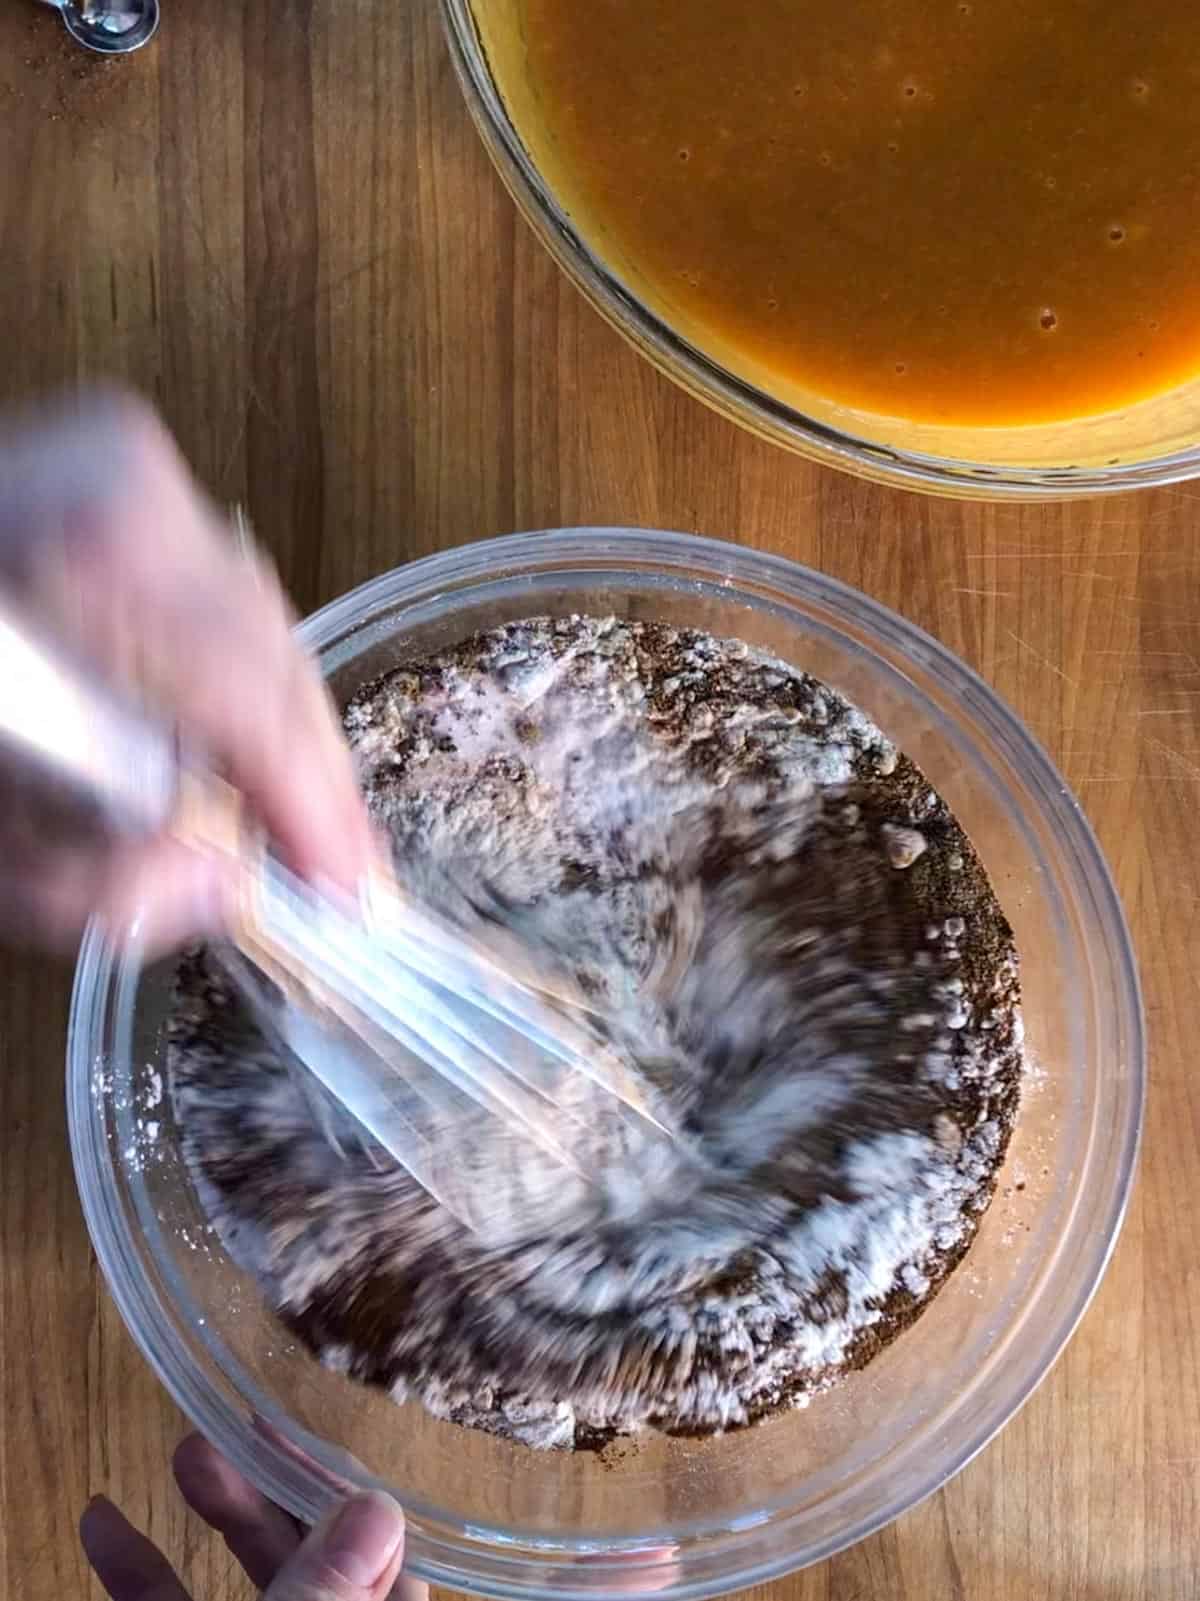 A glass bowl containing the dry ingredients for spiced pumpkin bread. The ingredients are being whisked with a metal whisk. There is also a glass bowl containing the wet ingredients for the spiced pumpkin bread.